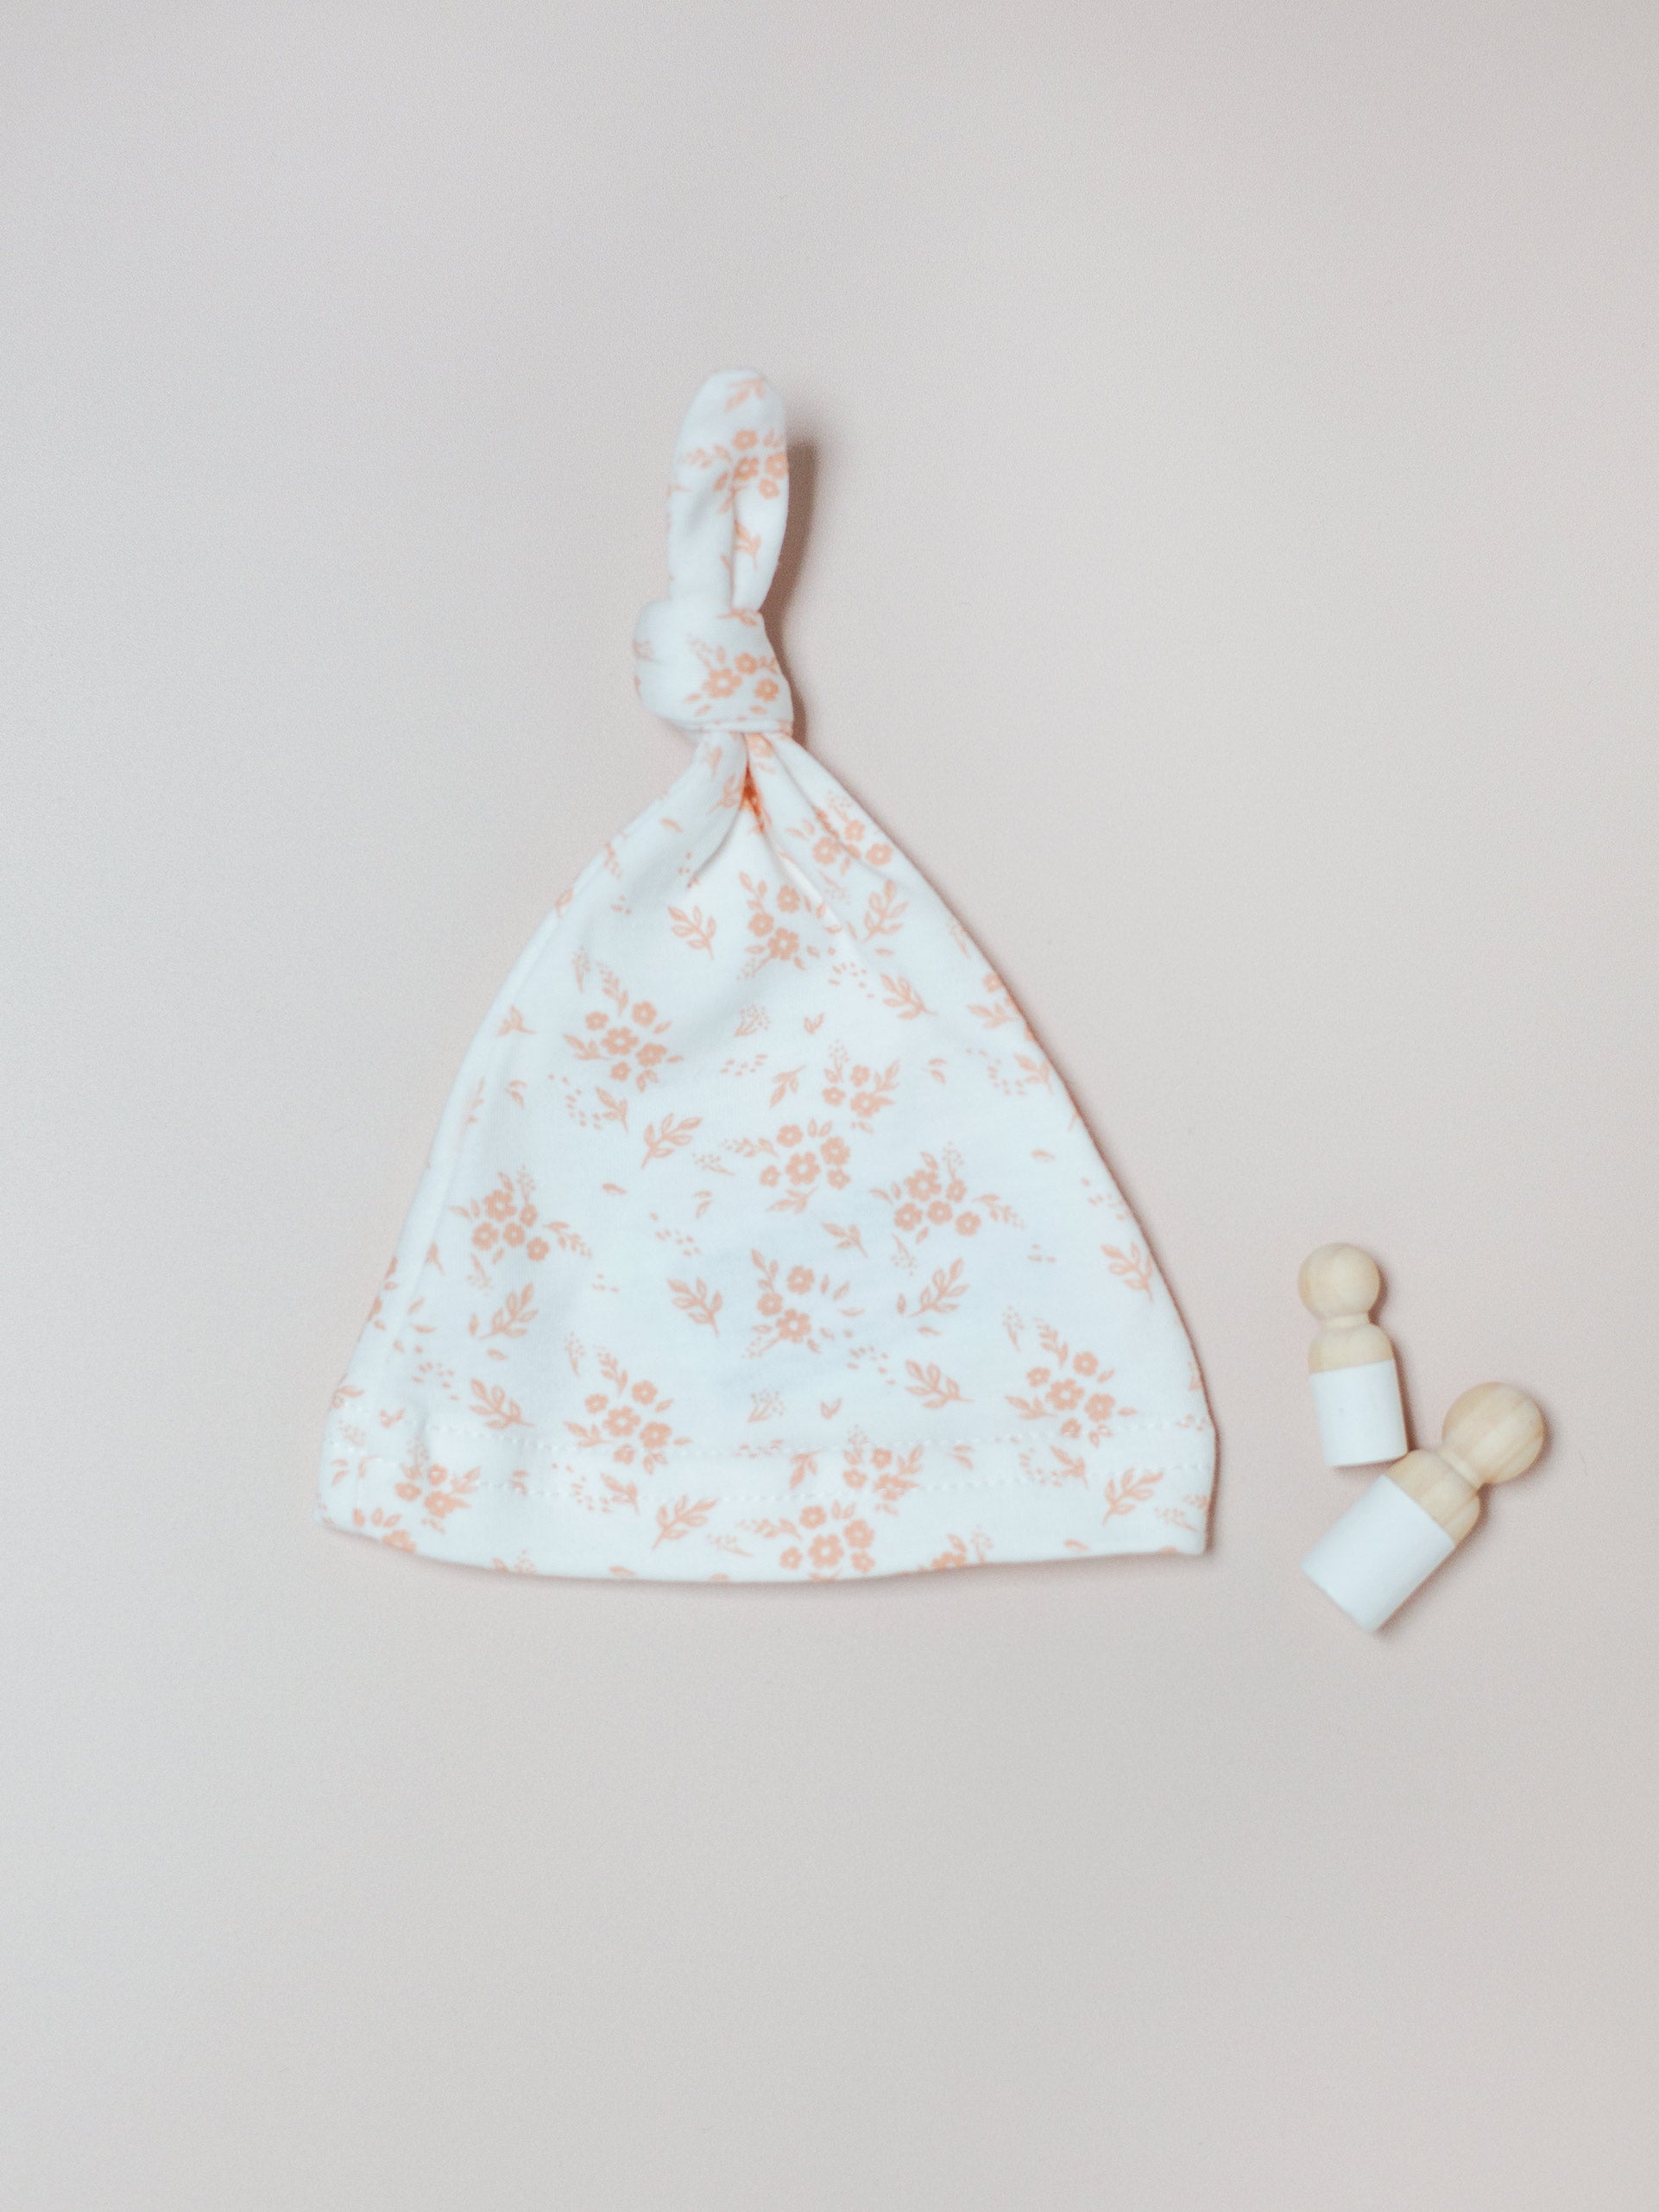 Knotted Hat, Apricot Floral, Premium 100% Organic Cotton Hat Tiny & Small 